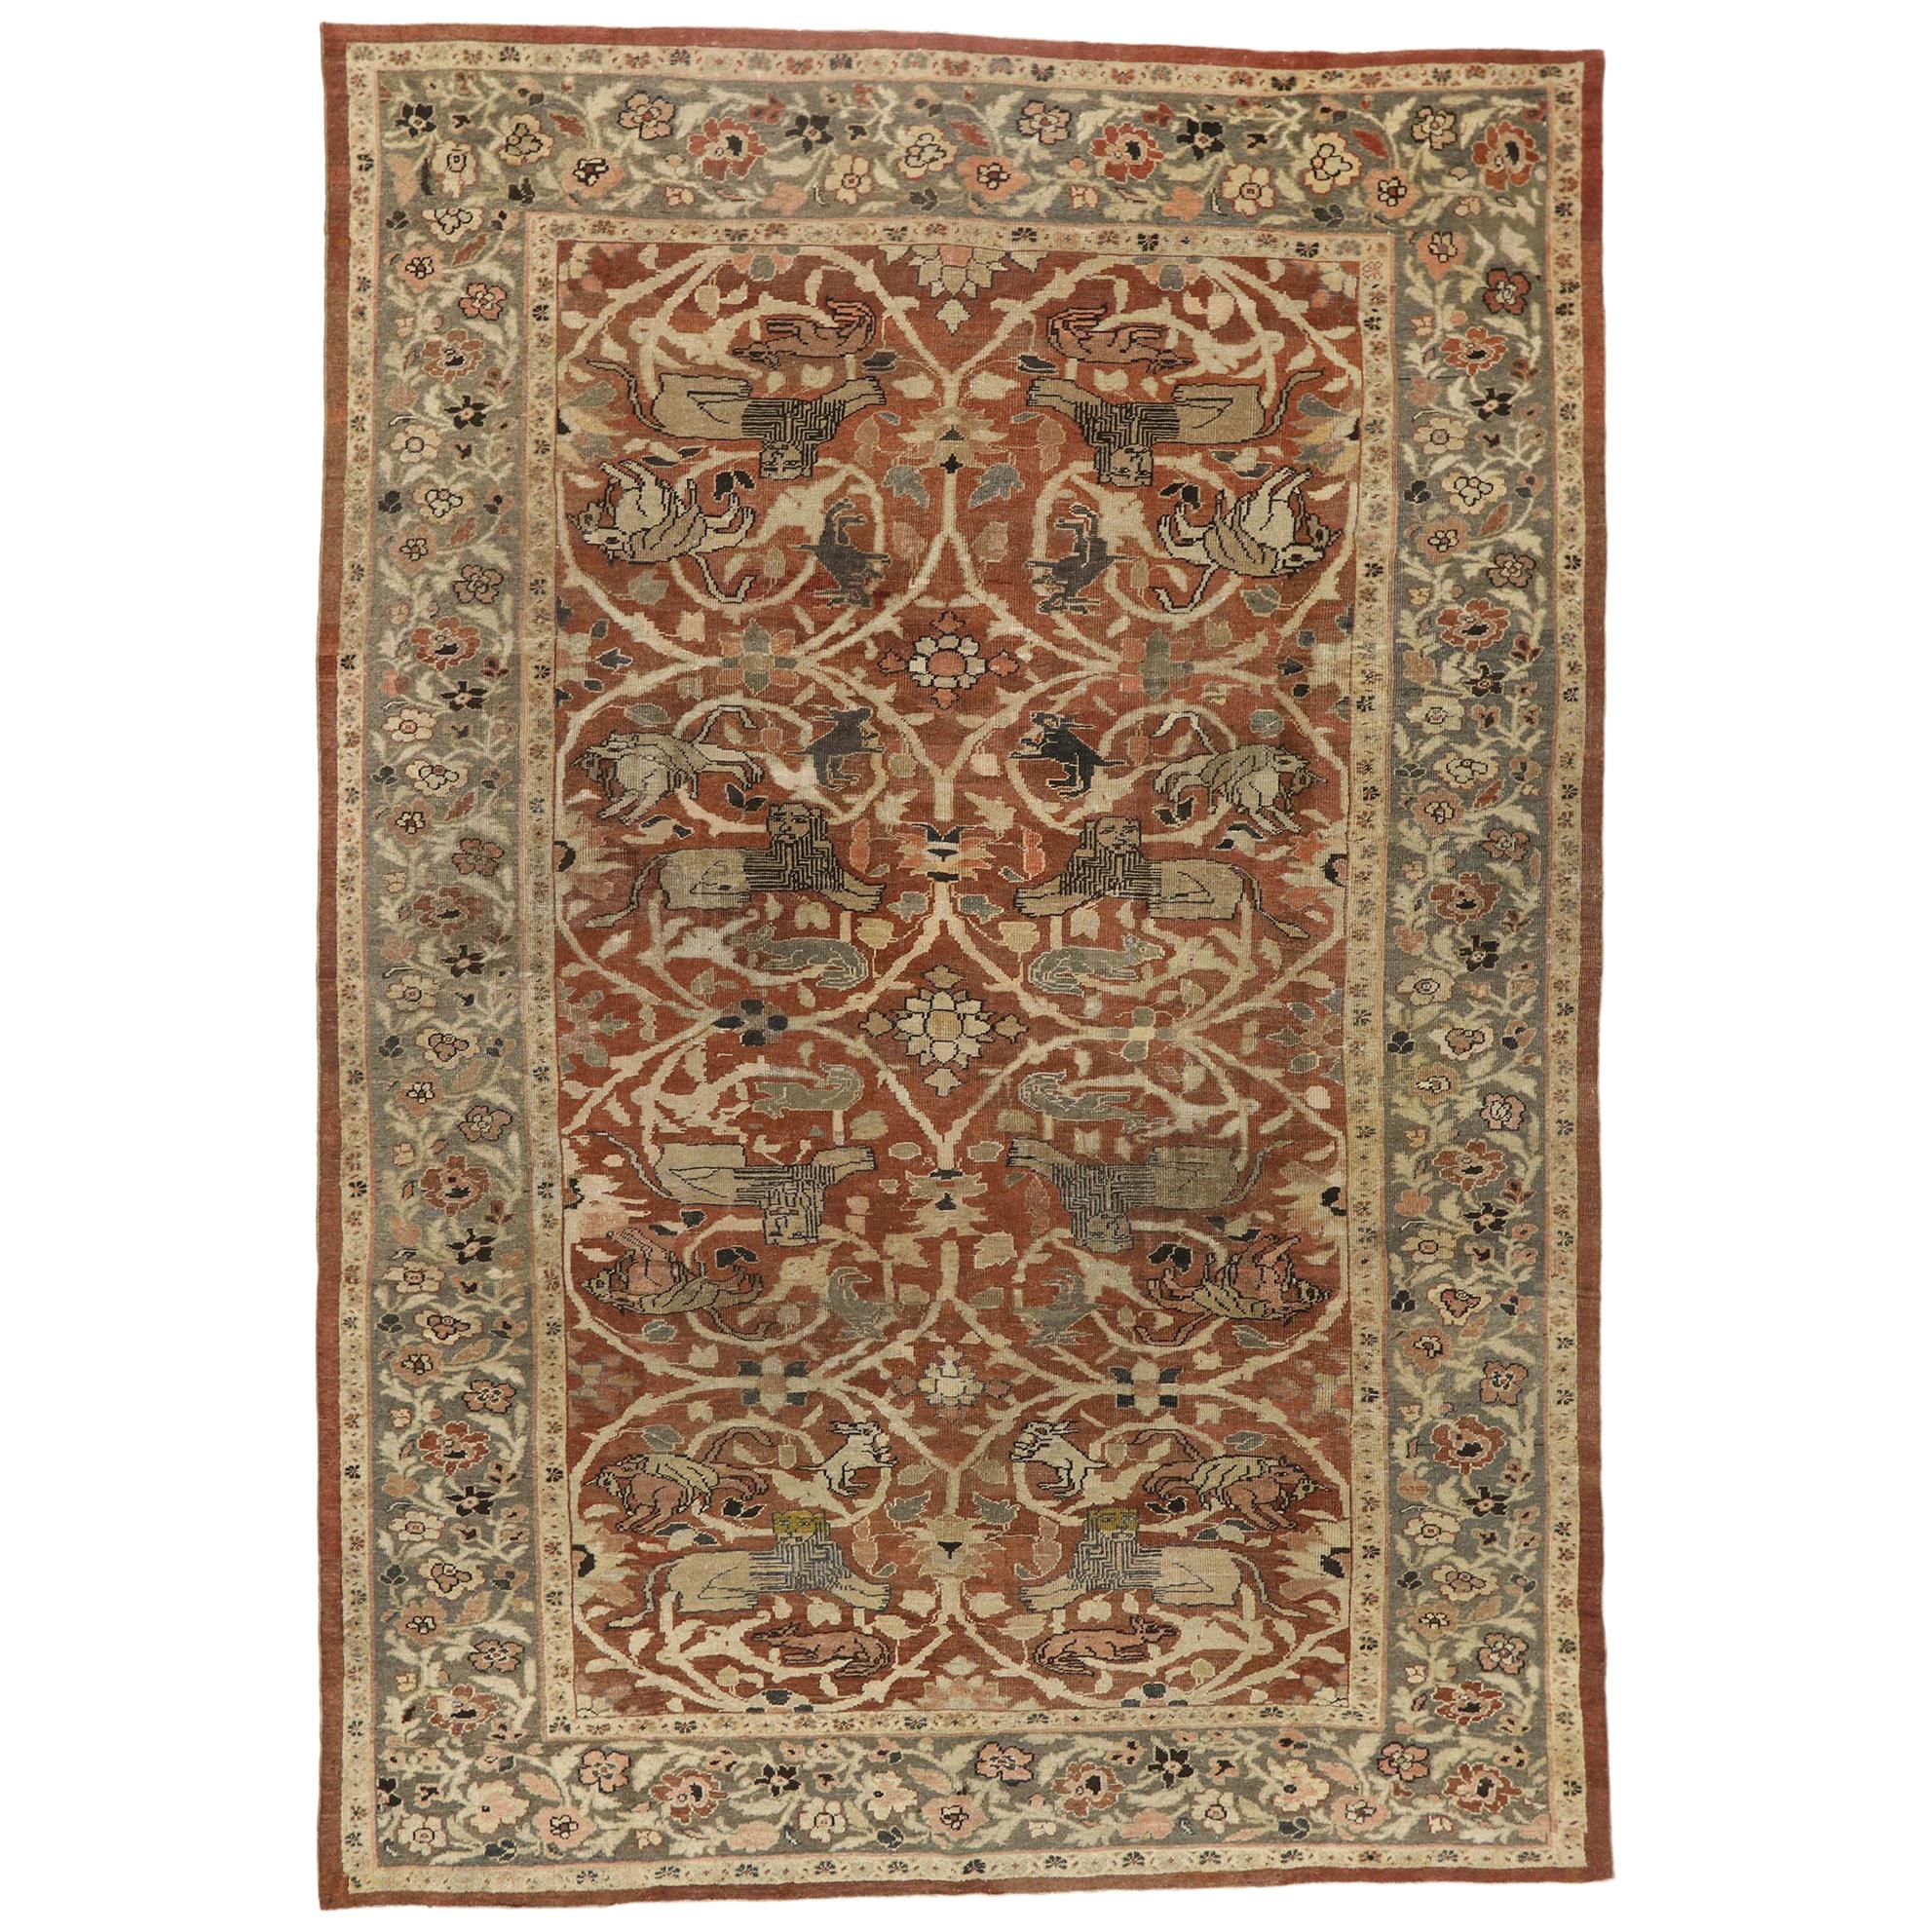 Antique-Worn Persian Sultanabad Hunting Rug, Laid-Back Luxury Meets Rustic Style